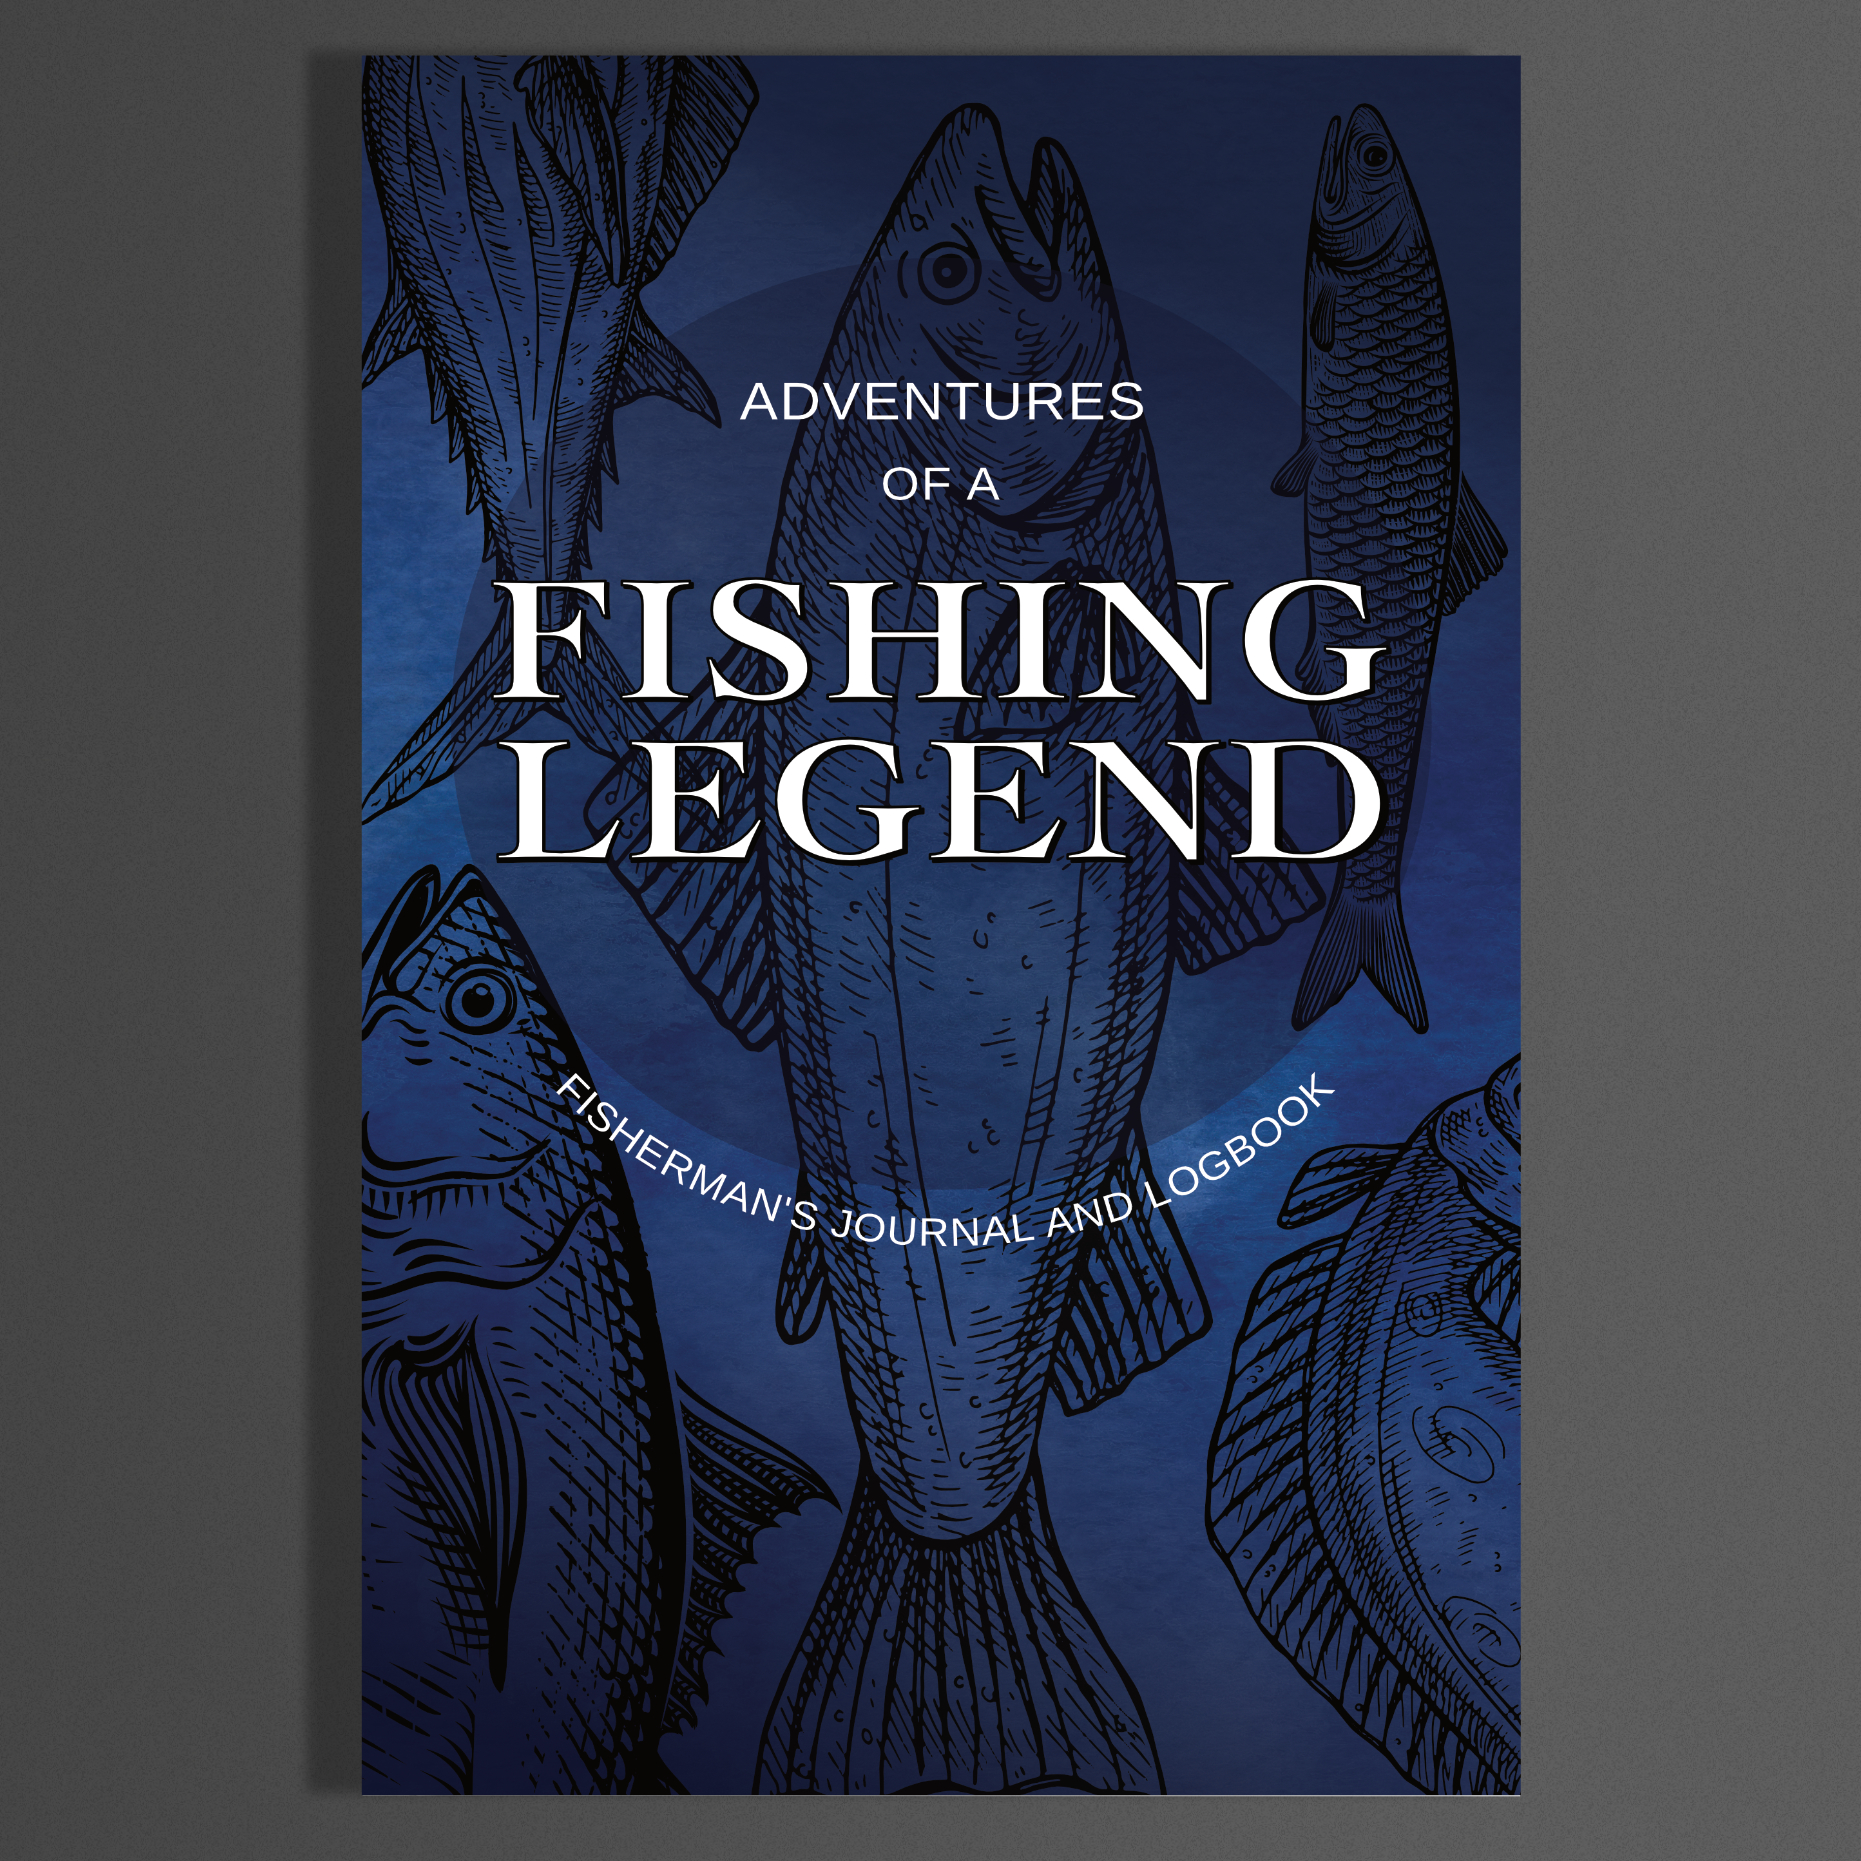 Adventures of a Fishing Legend – Fisherman's Journal and Logbook